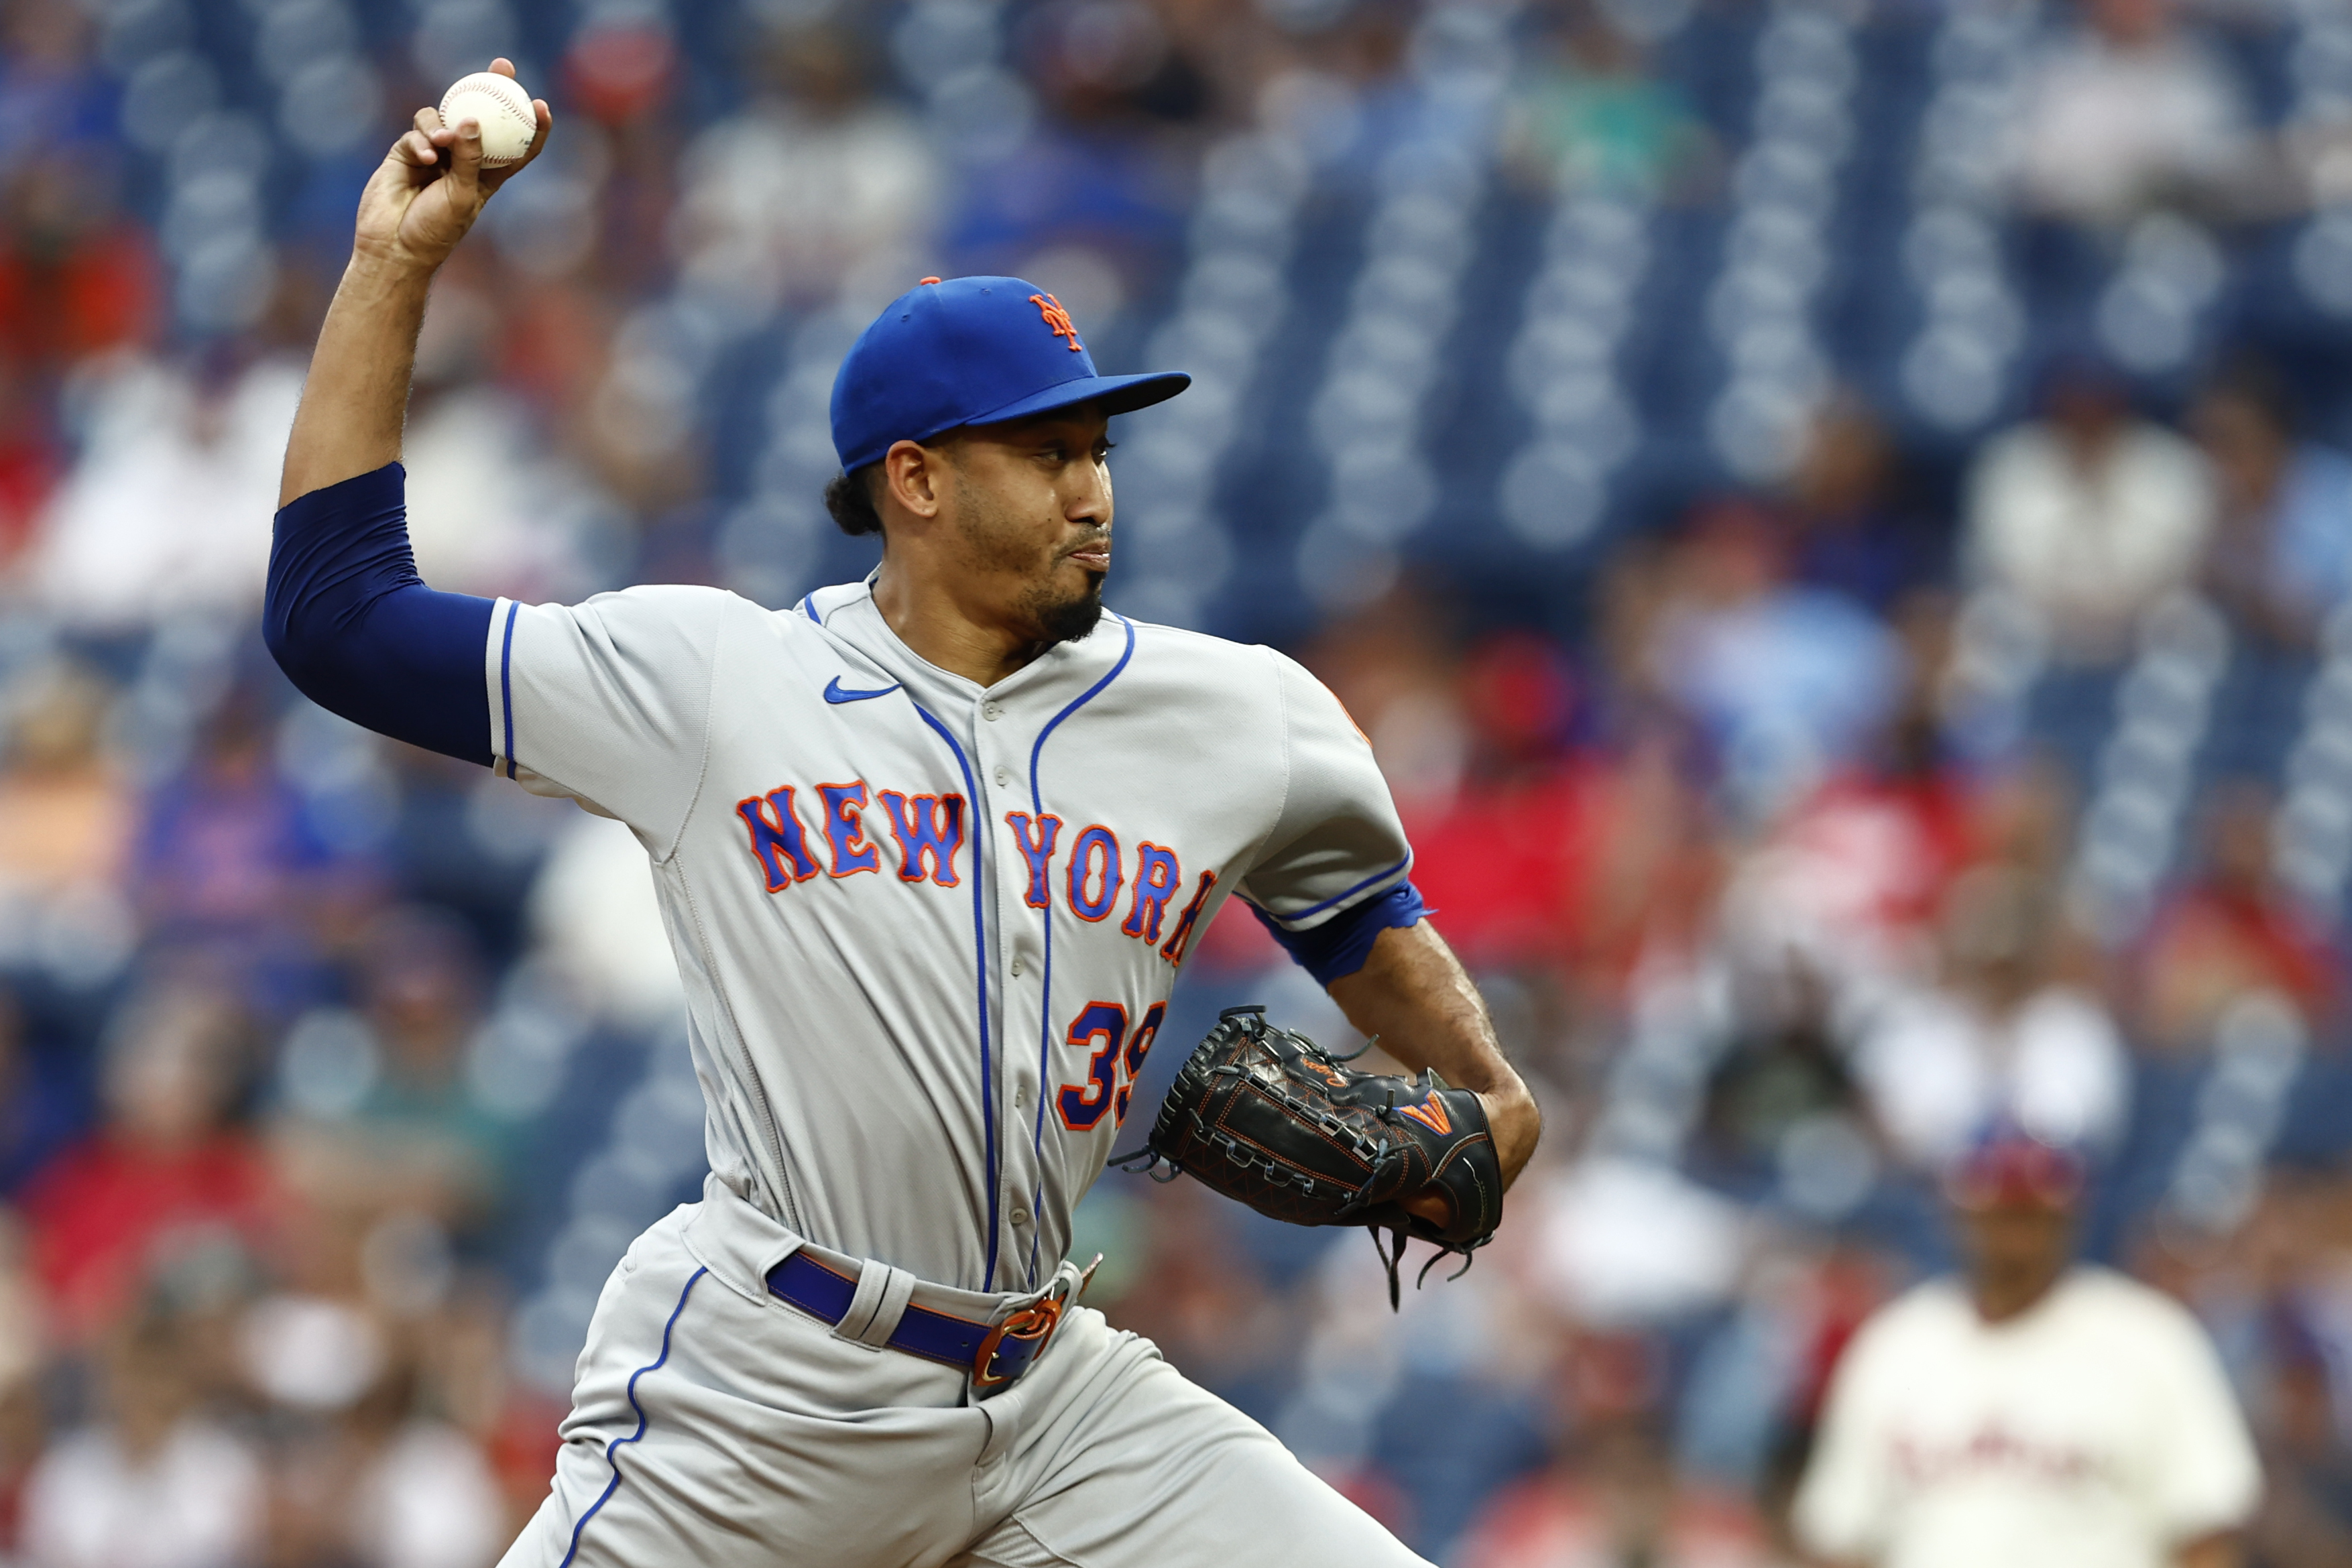 What Changed to Make Edwin Diaz So Dominant This Year?